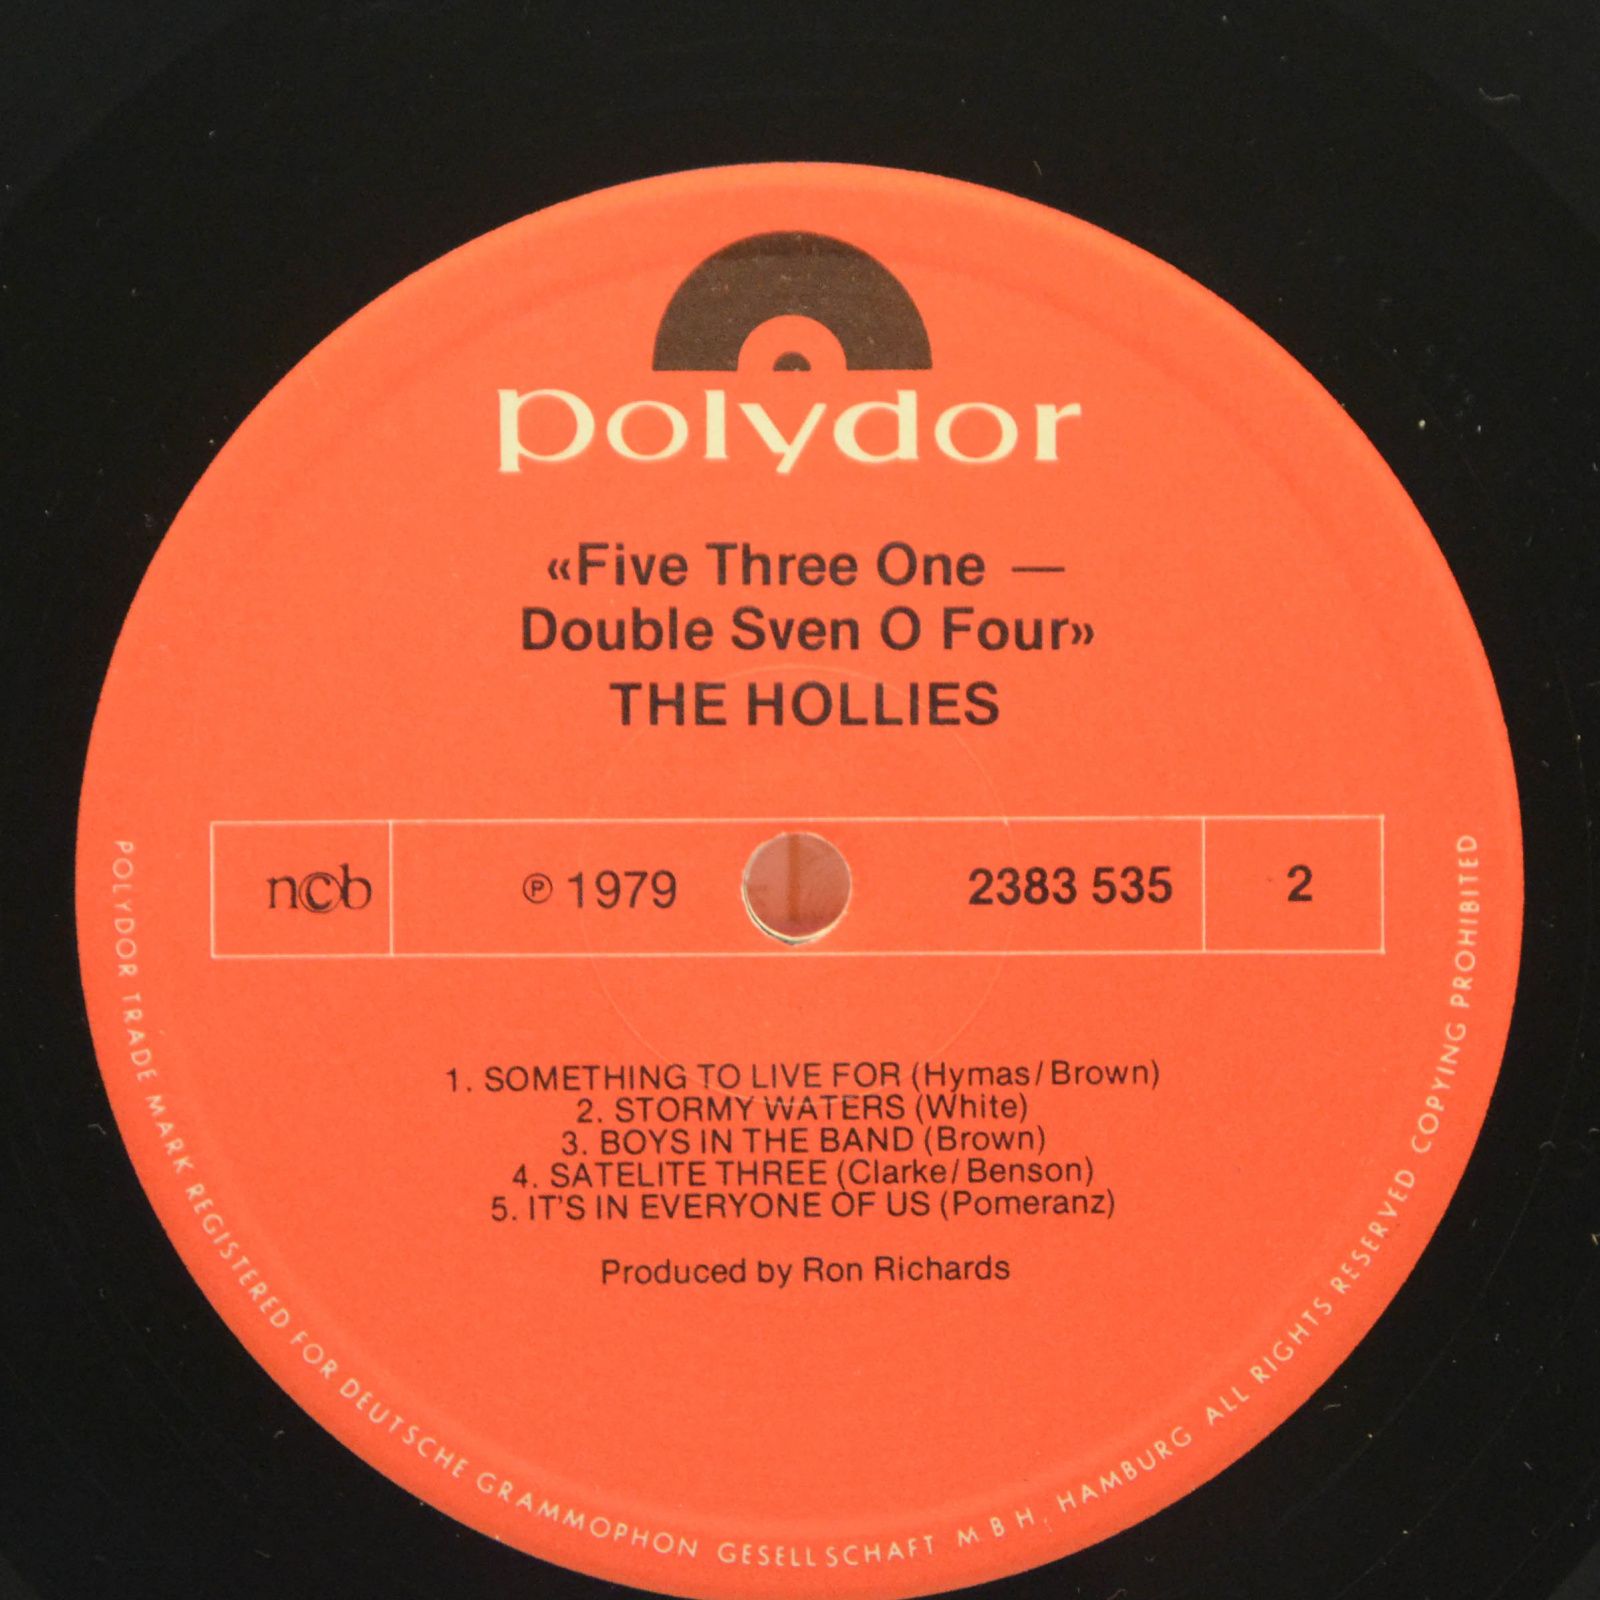 Hollies — Five Three One - Double Seven O Four, 1979